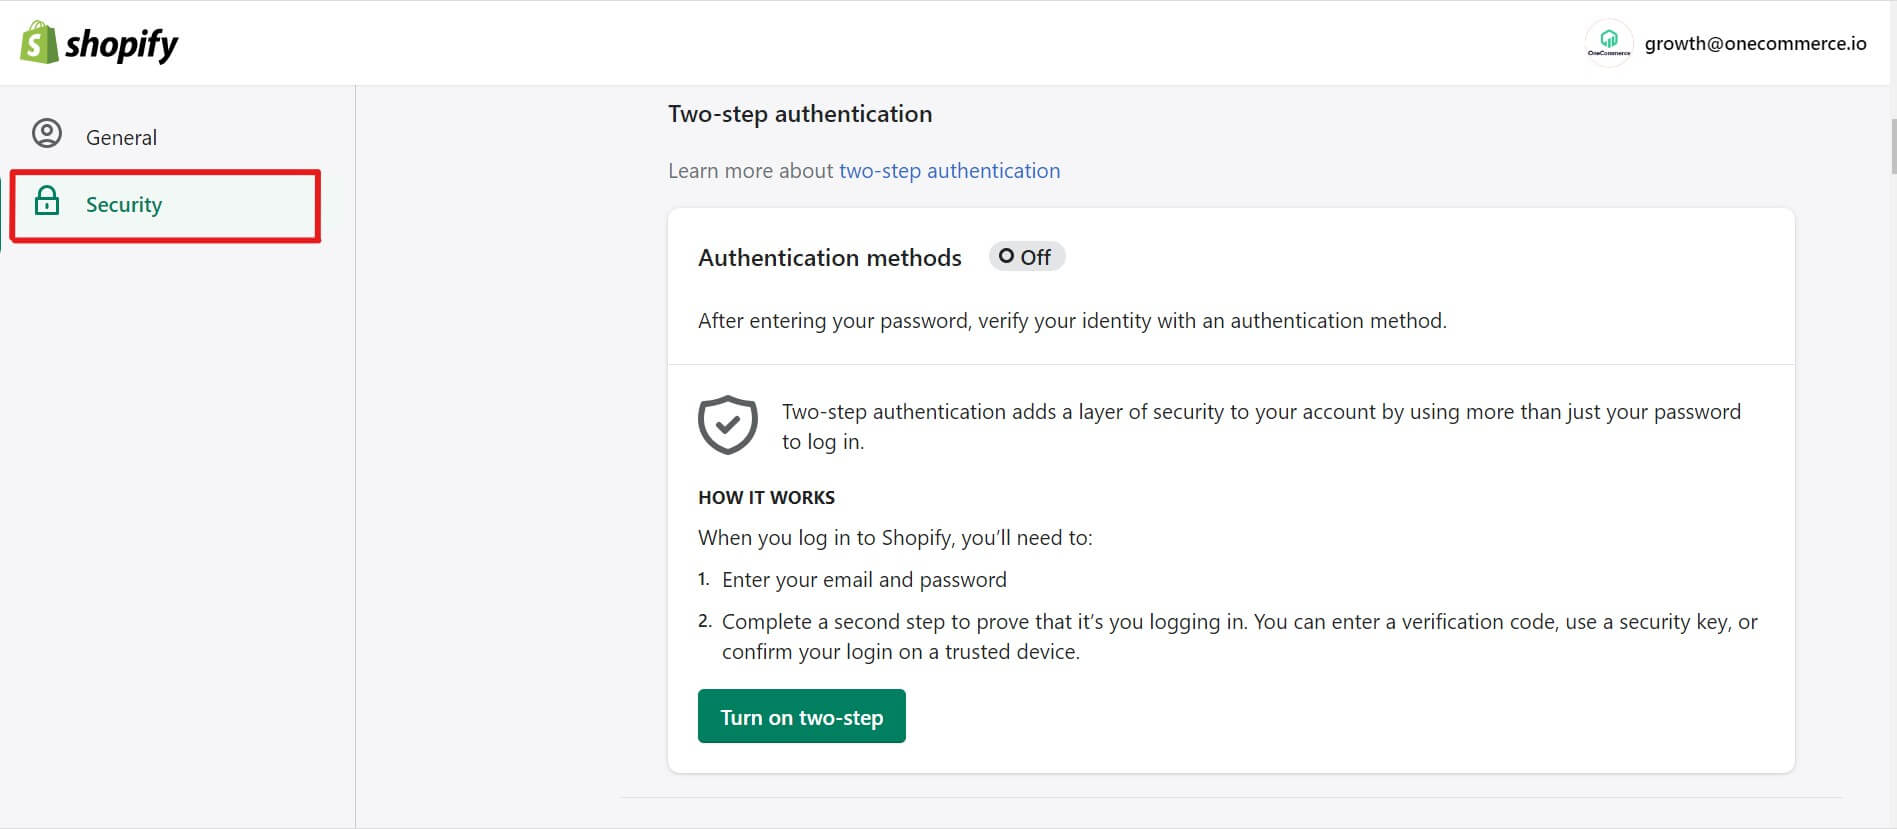 Shopify security tools - Google Authenticator